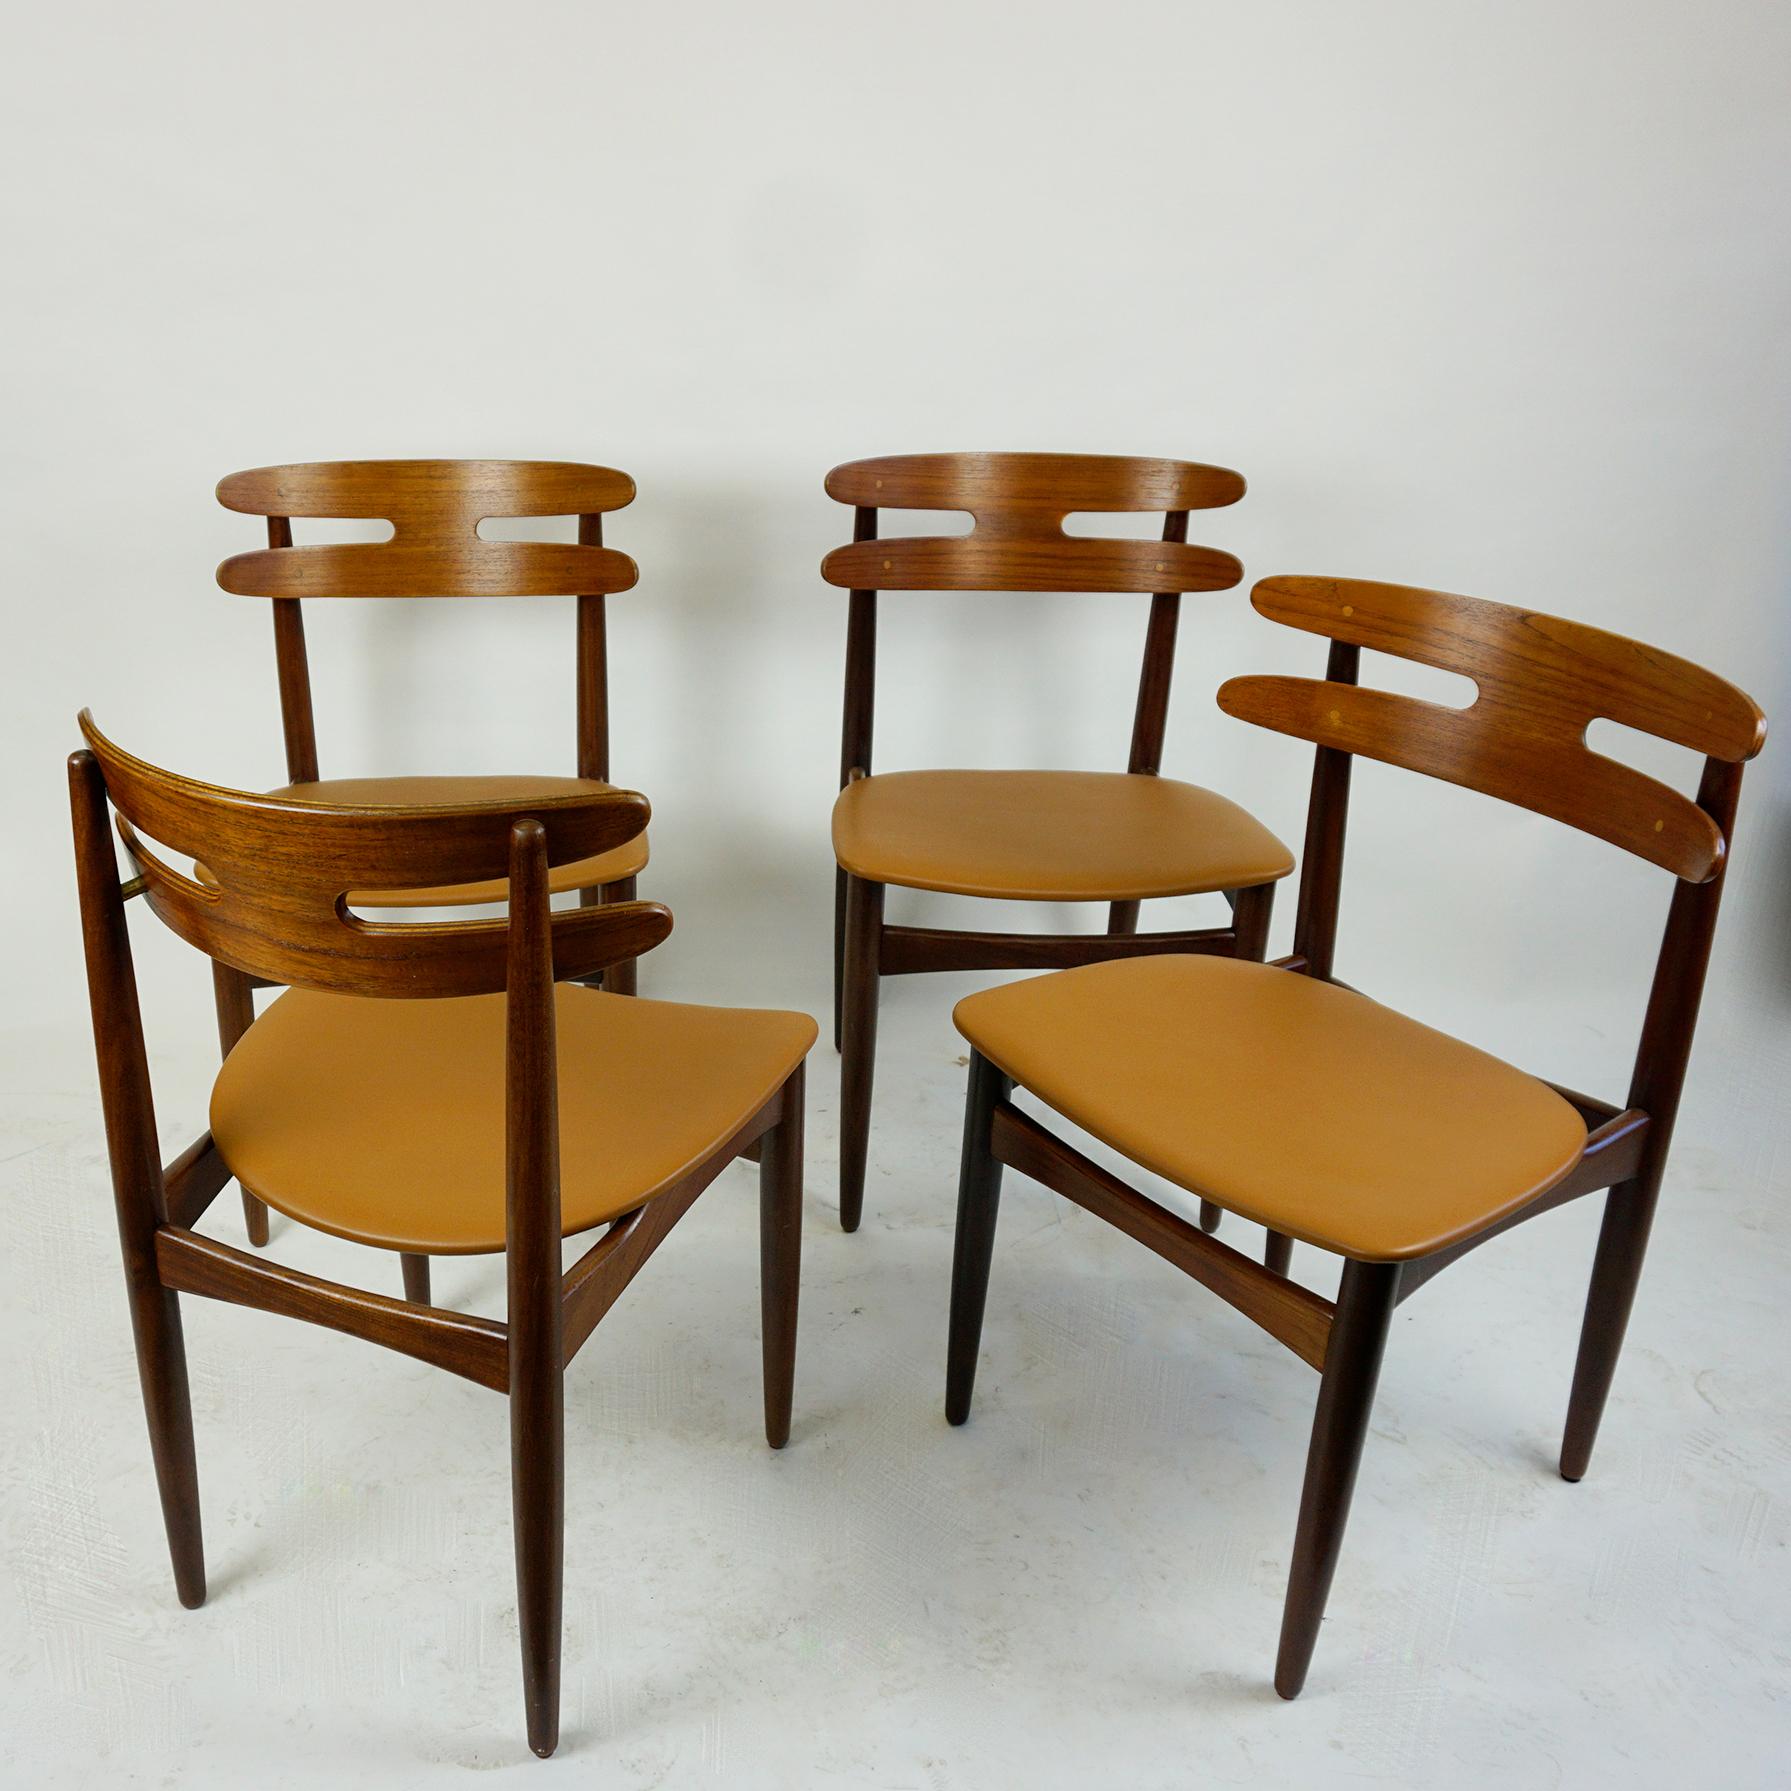 This rare set of organic shaped four Scandinavian Modern teak dining chairs is designed by Johannes Andersen in the 1960s and produced by Bramin Mobler, mod. no 178. They feature solid teak wood frames and moulded teak veneer backrests with brass